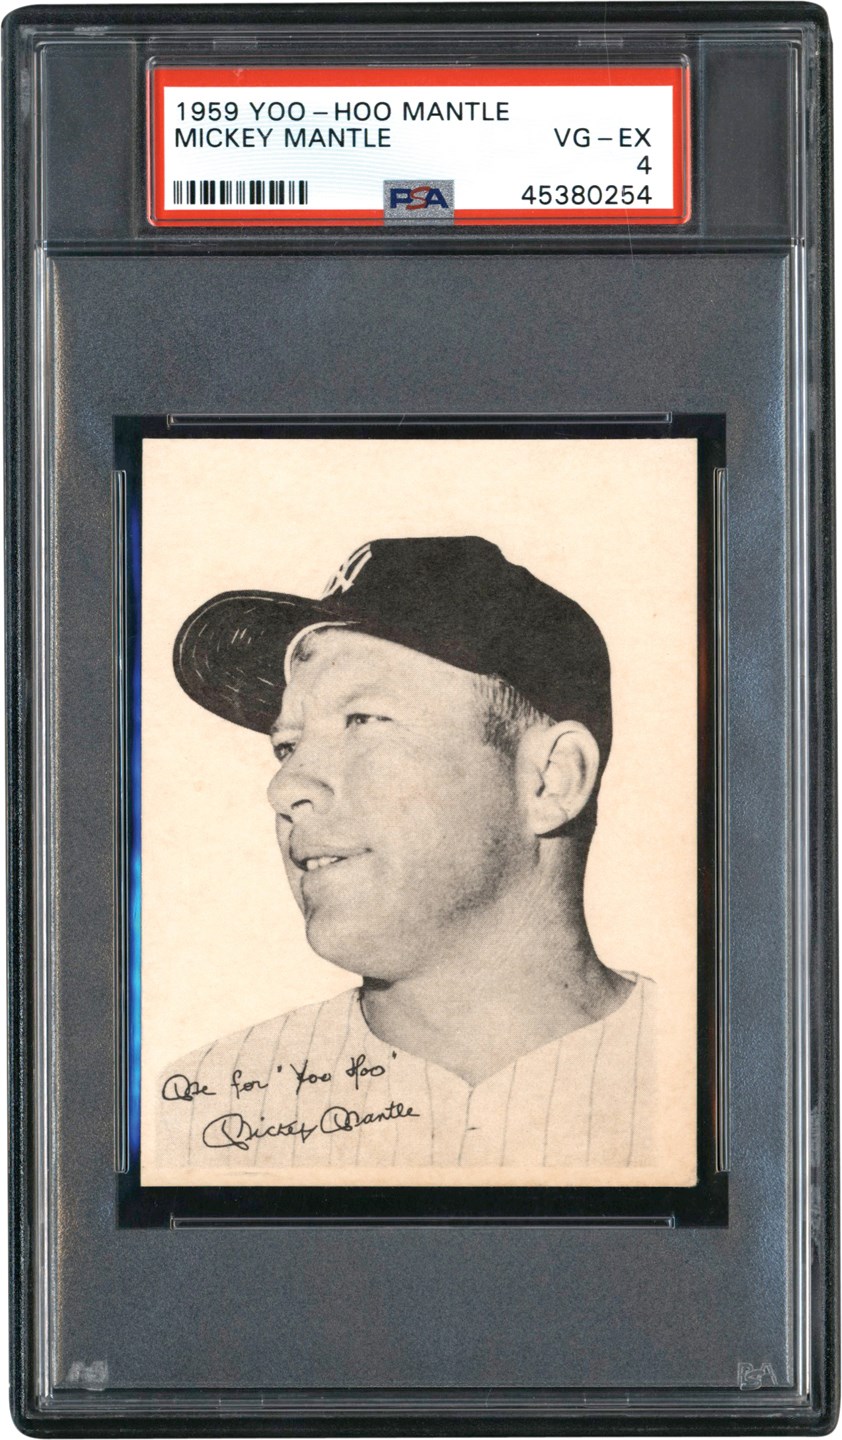 - xtremely Scarce 1959 Yoo-Hoo Mickey Mantle PSA VG-EX 4 (1 of 5 PSA Examples)